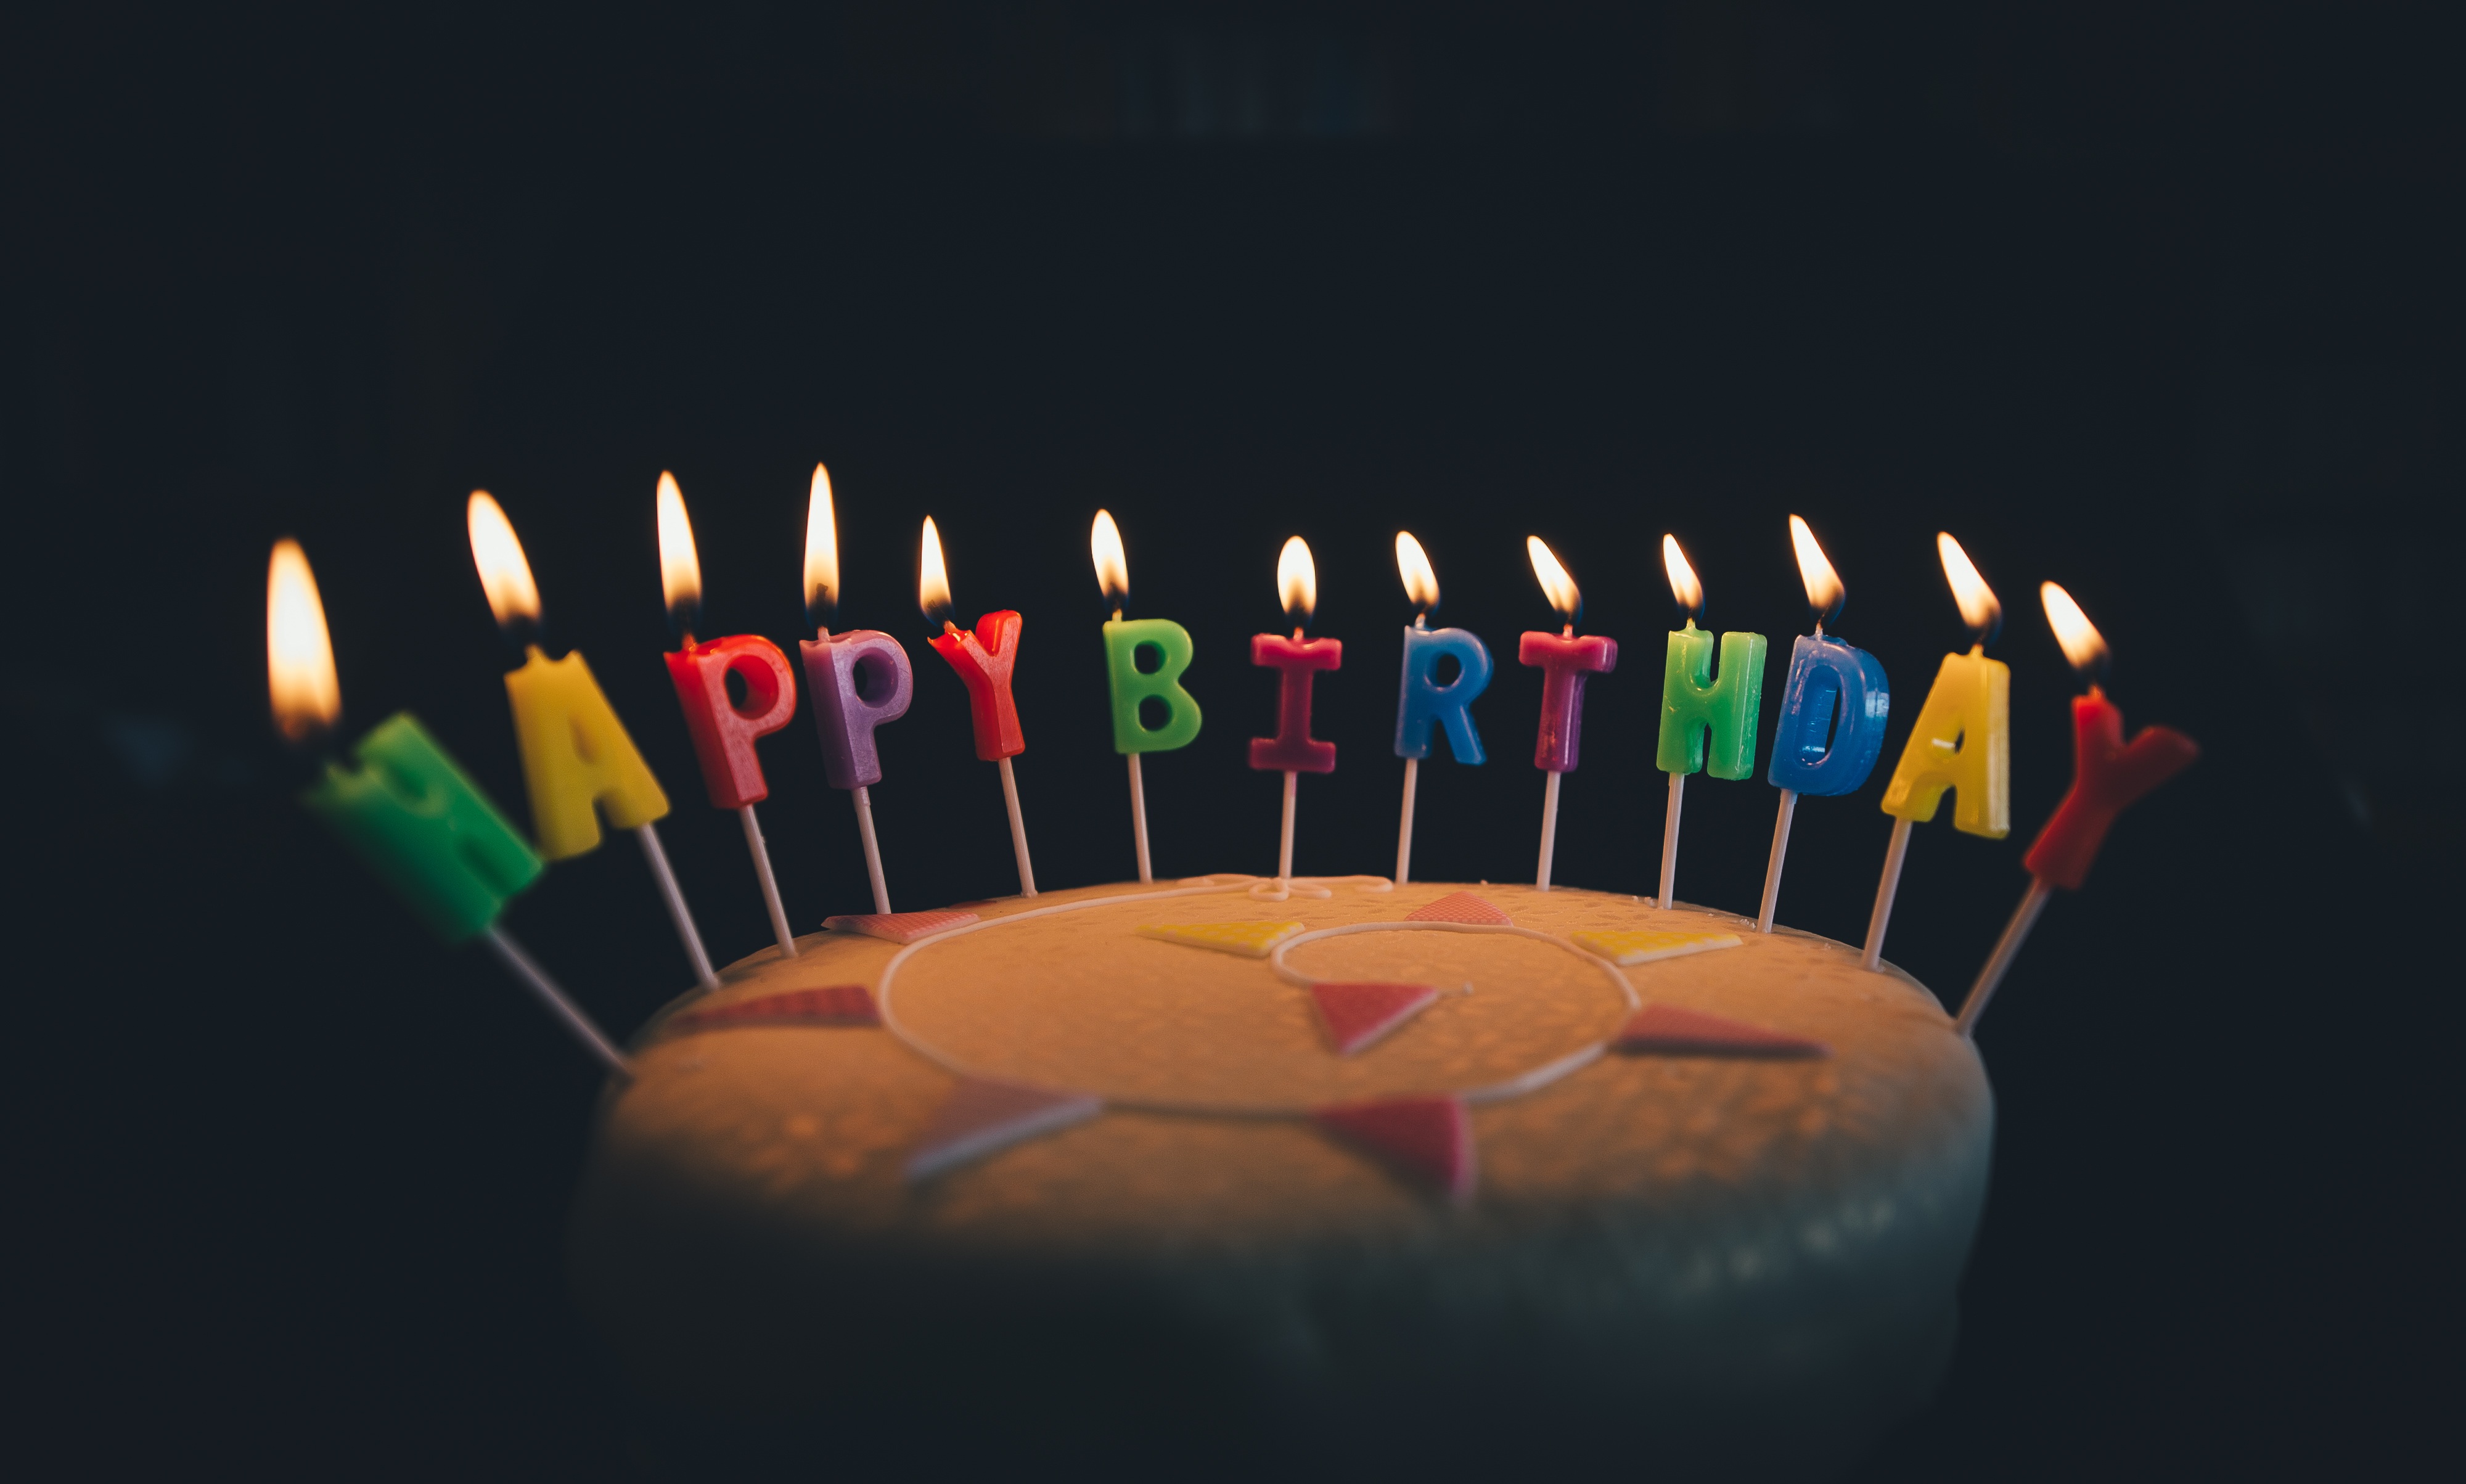 Happy 35th Birthday to Spencer Insurance Brokers!